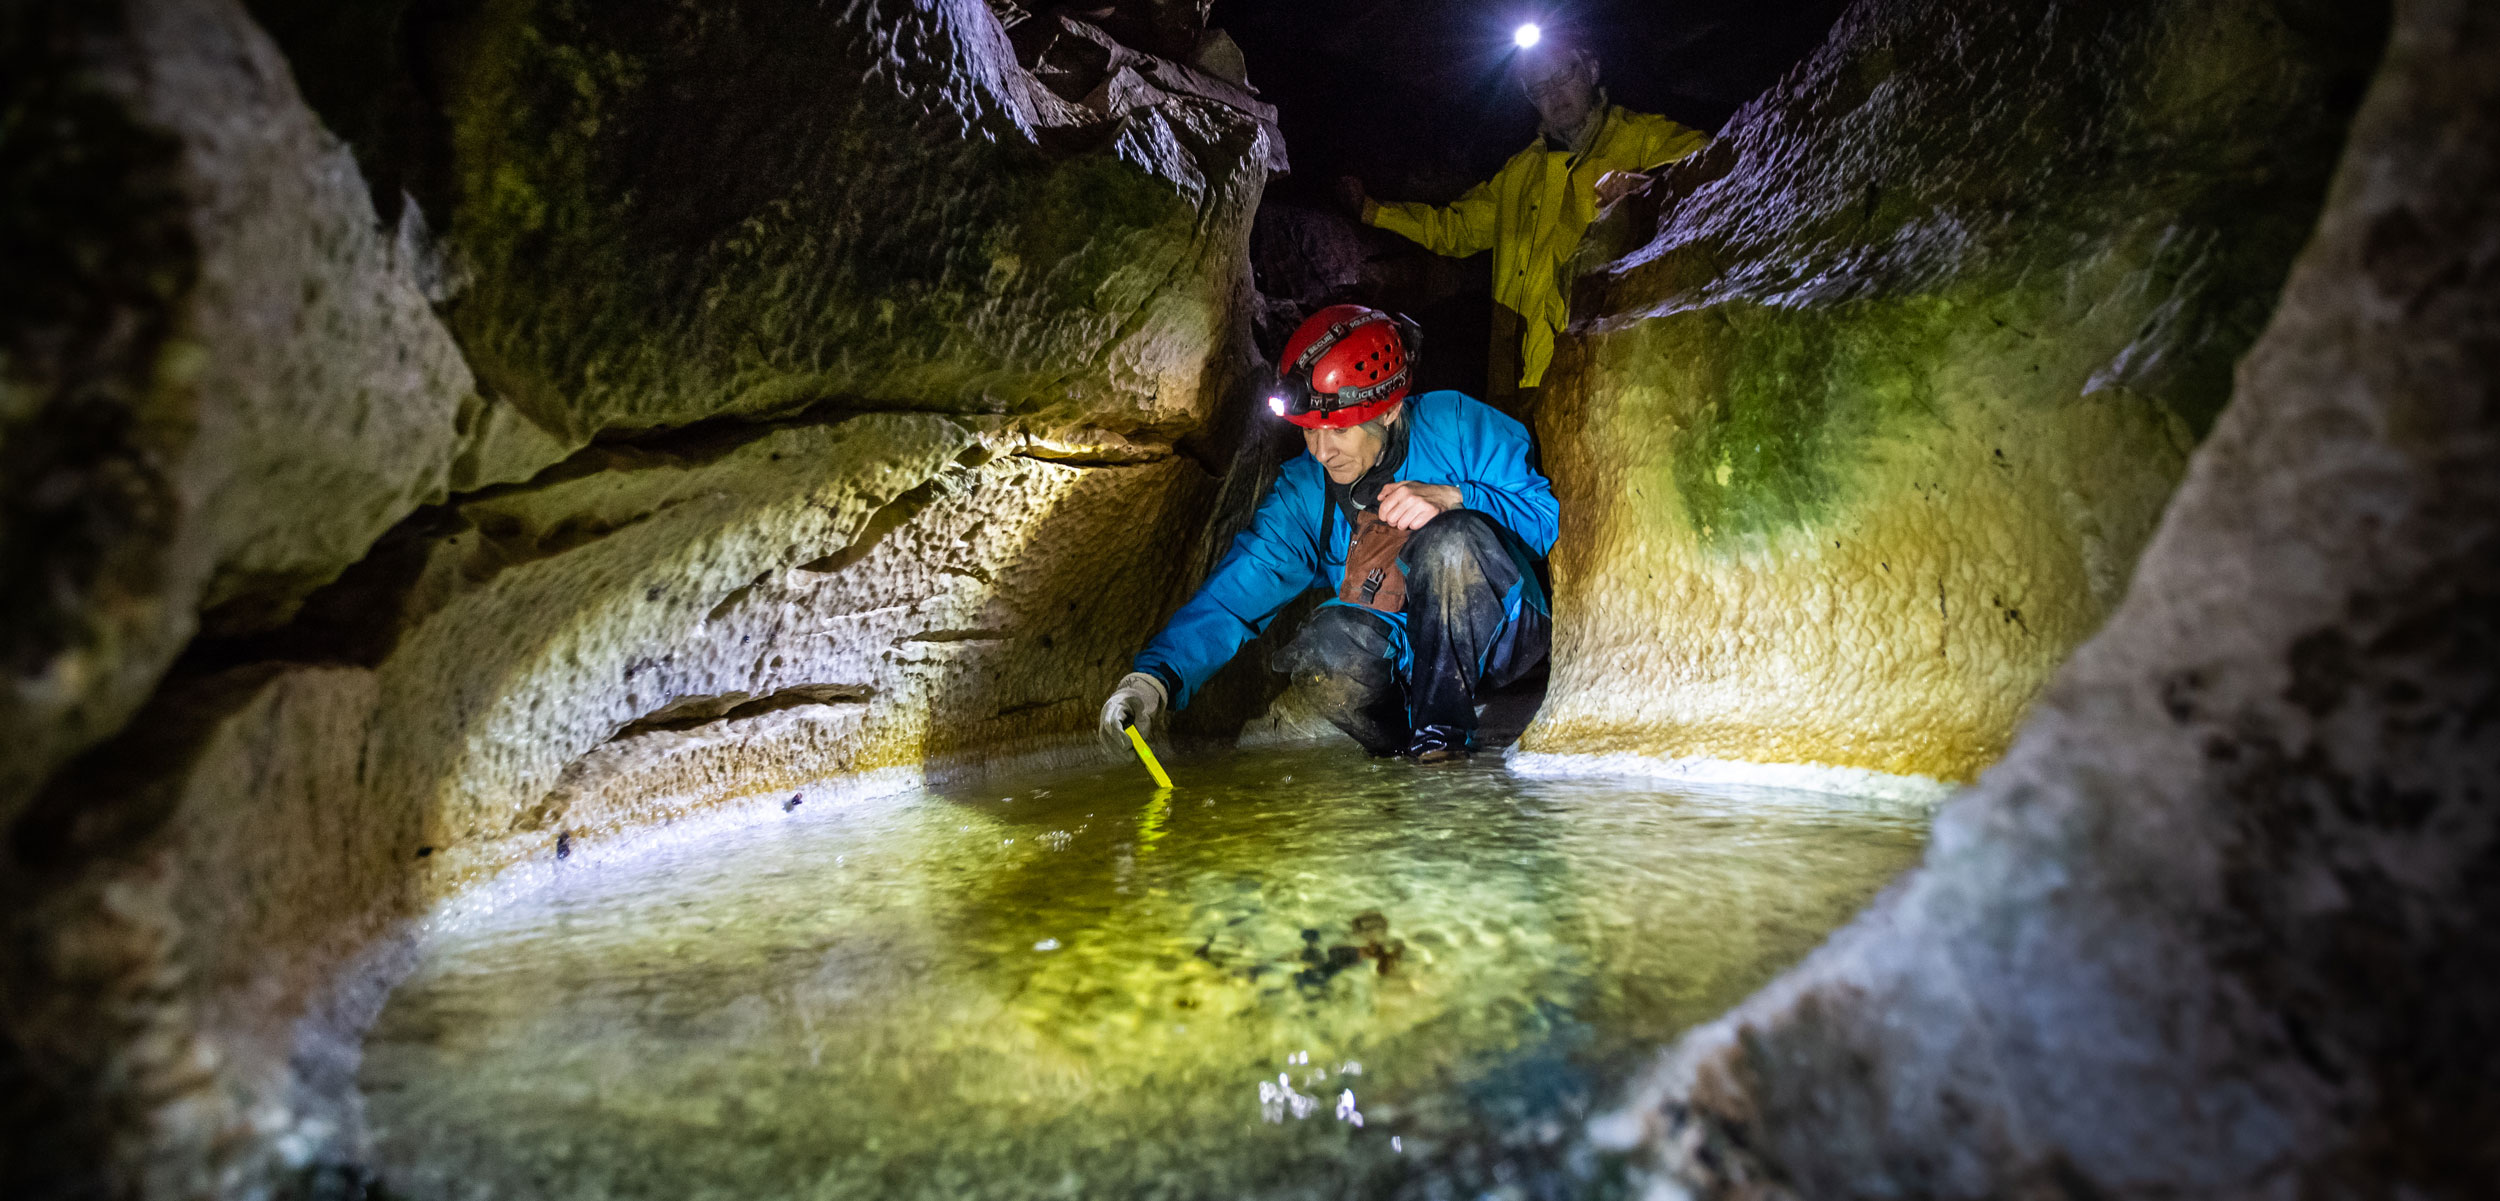 Scientist taking water sample from small pool in a cave.